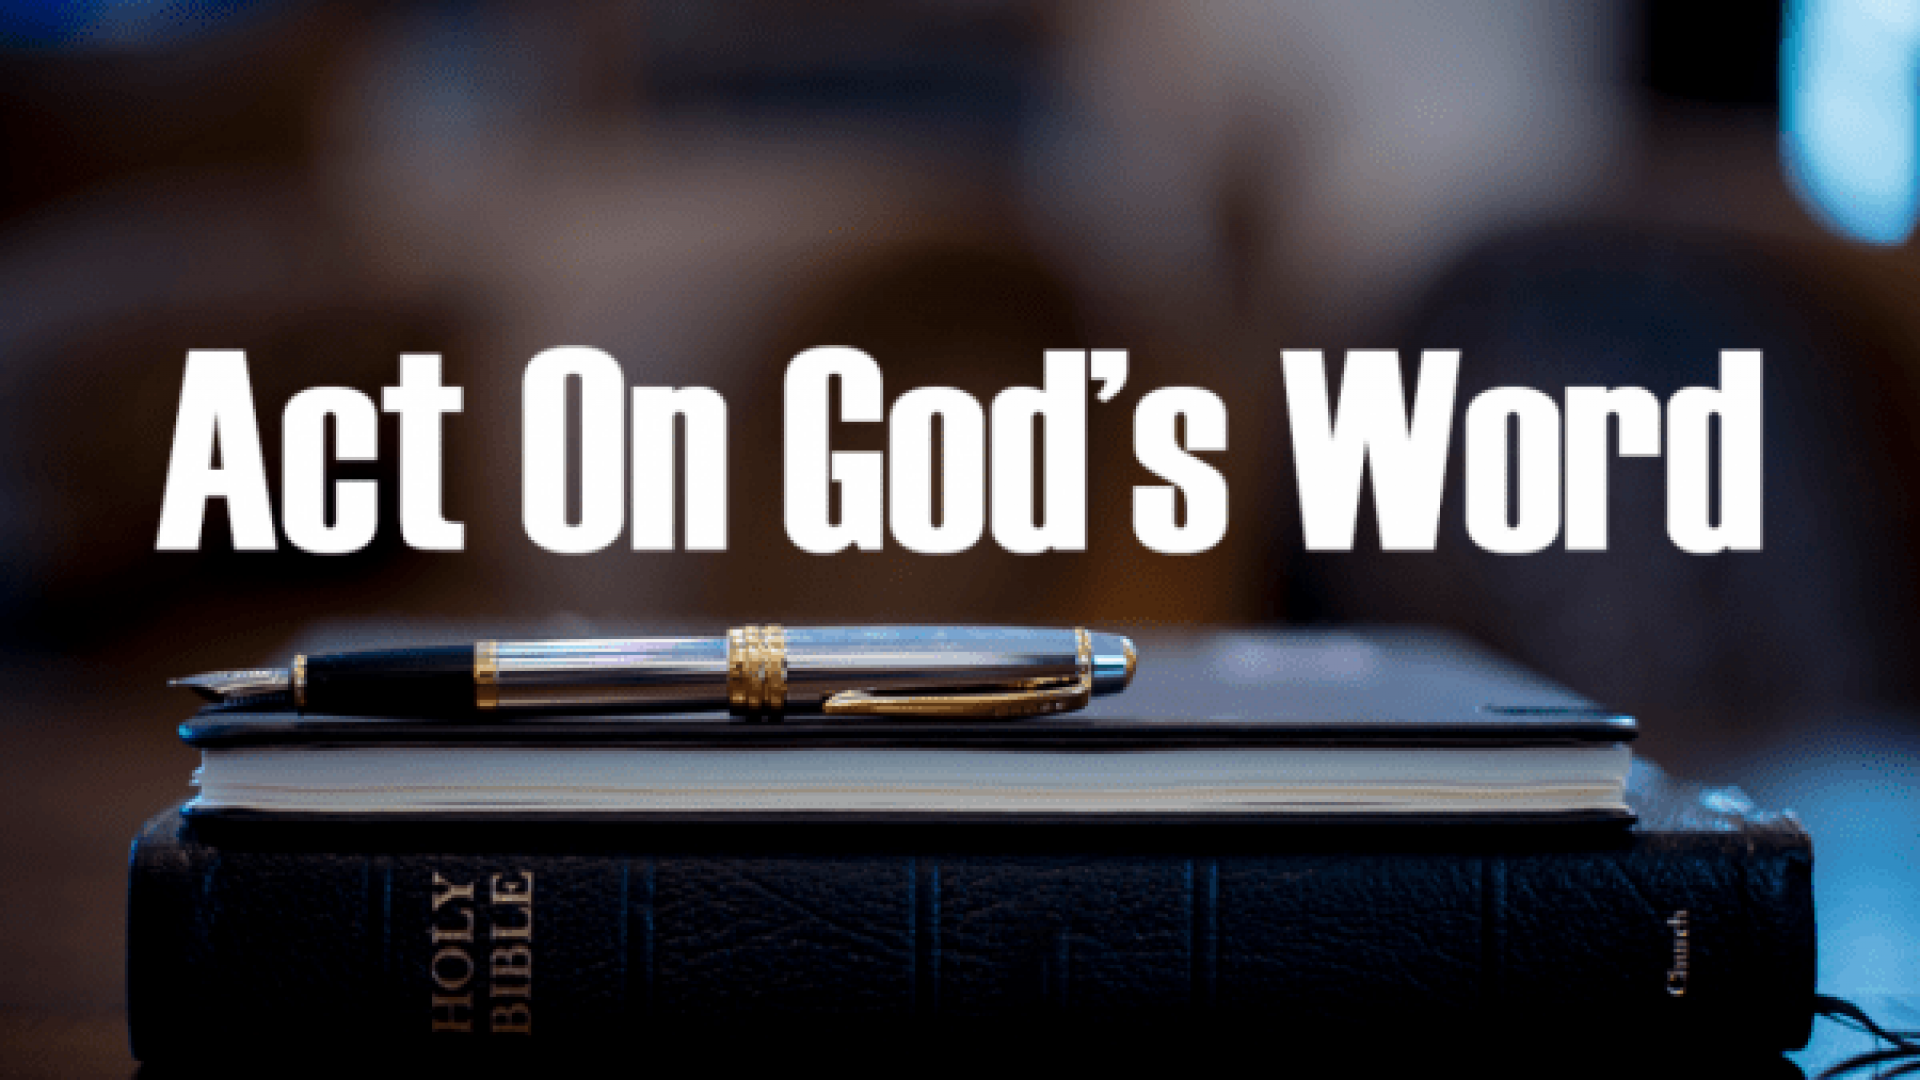 ACT ON GOD’S WORD